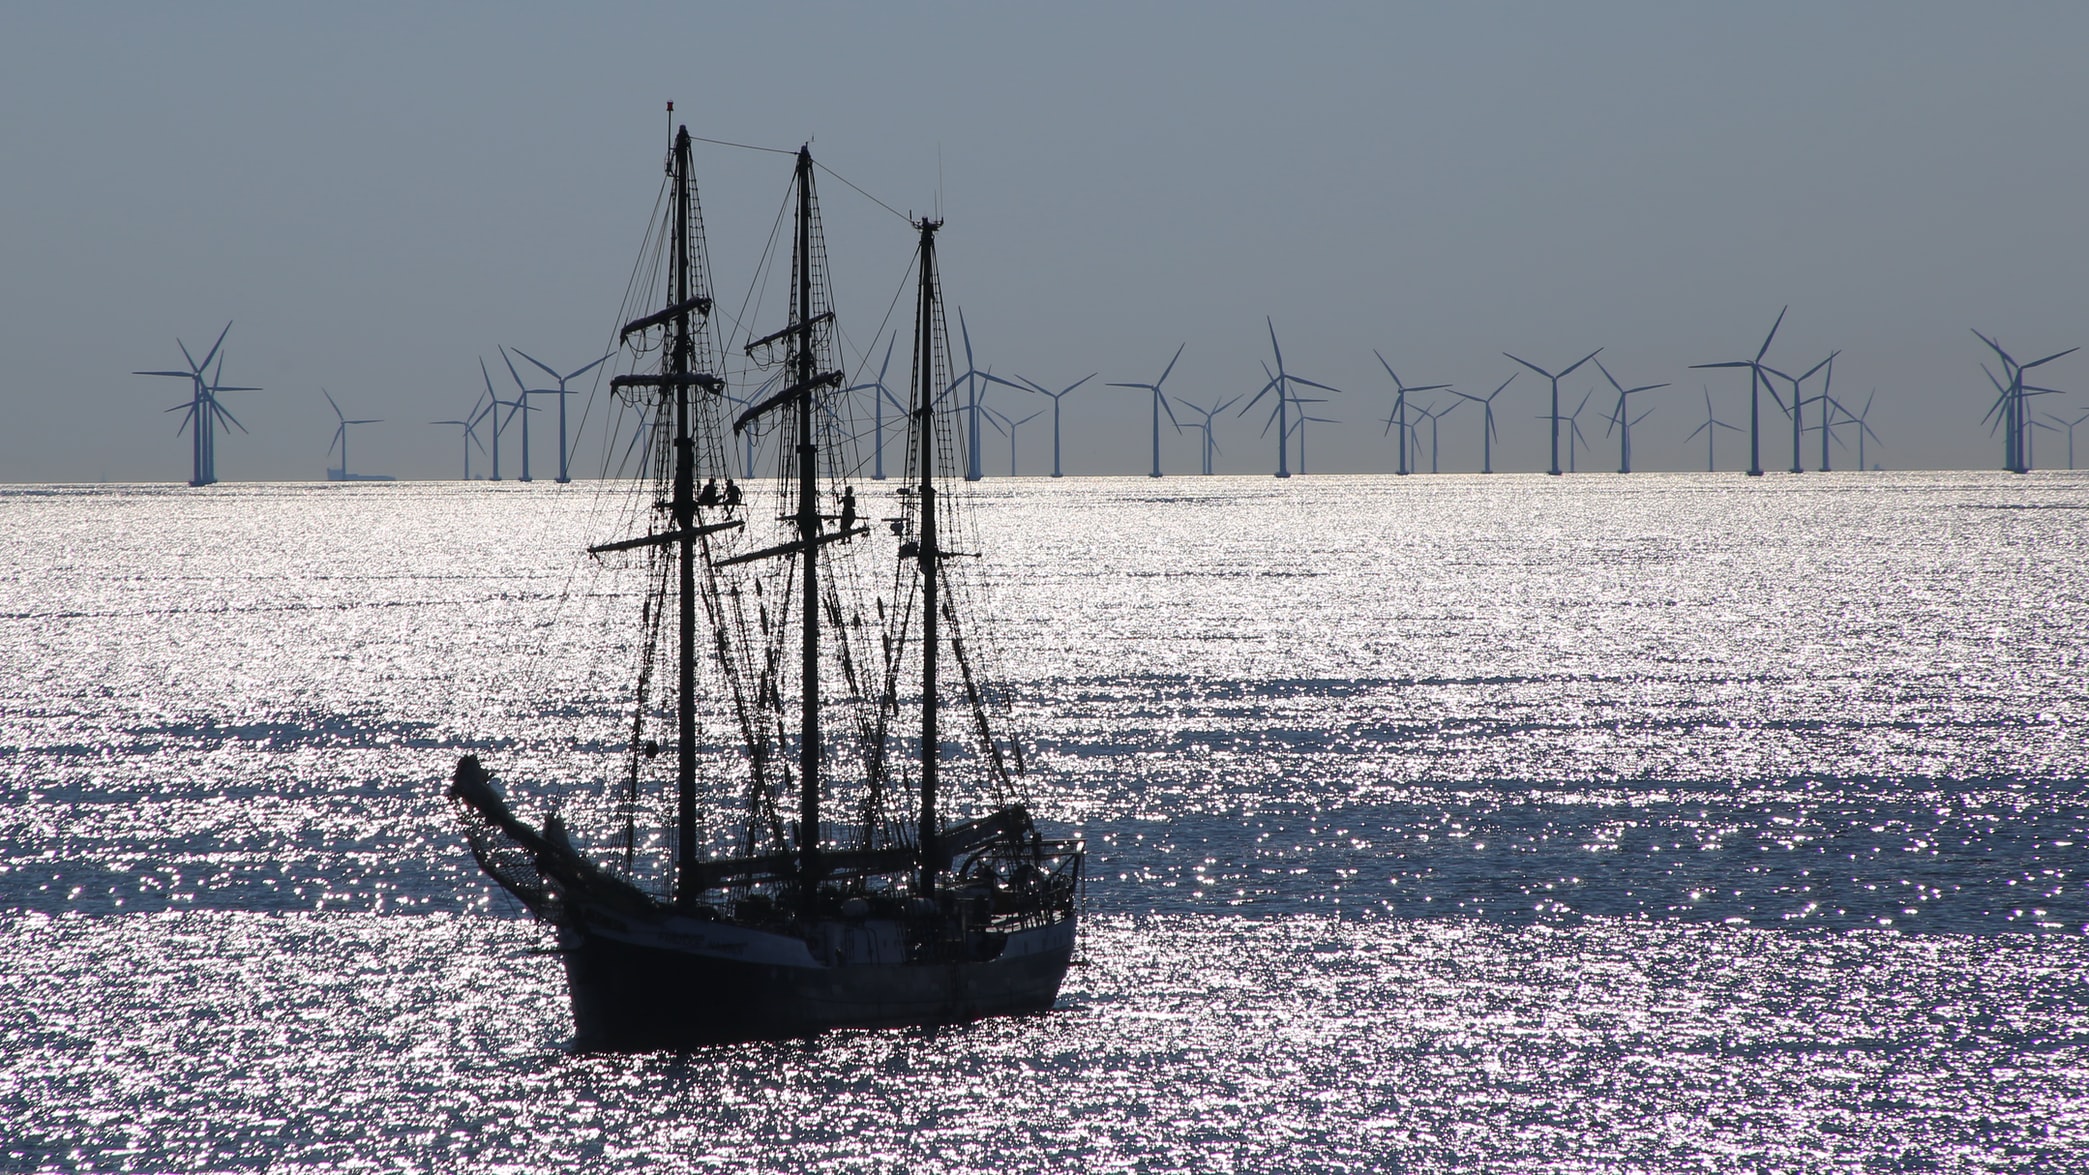 Every $1 invested in global offshore wind production generates a benefit estimated at $2 - $17.